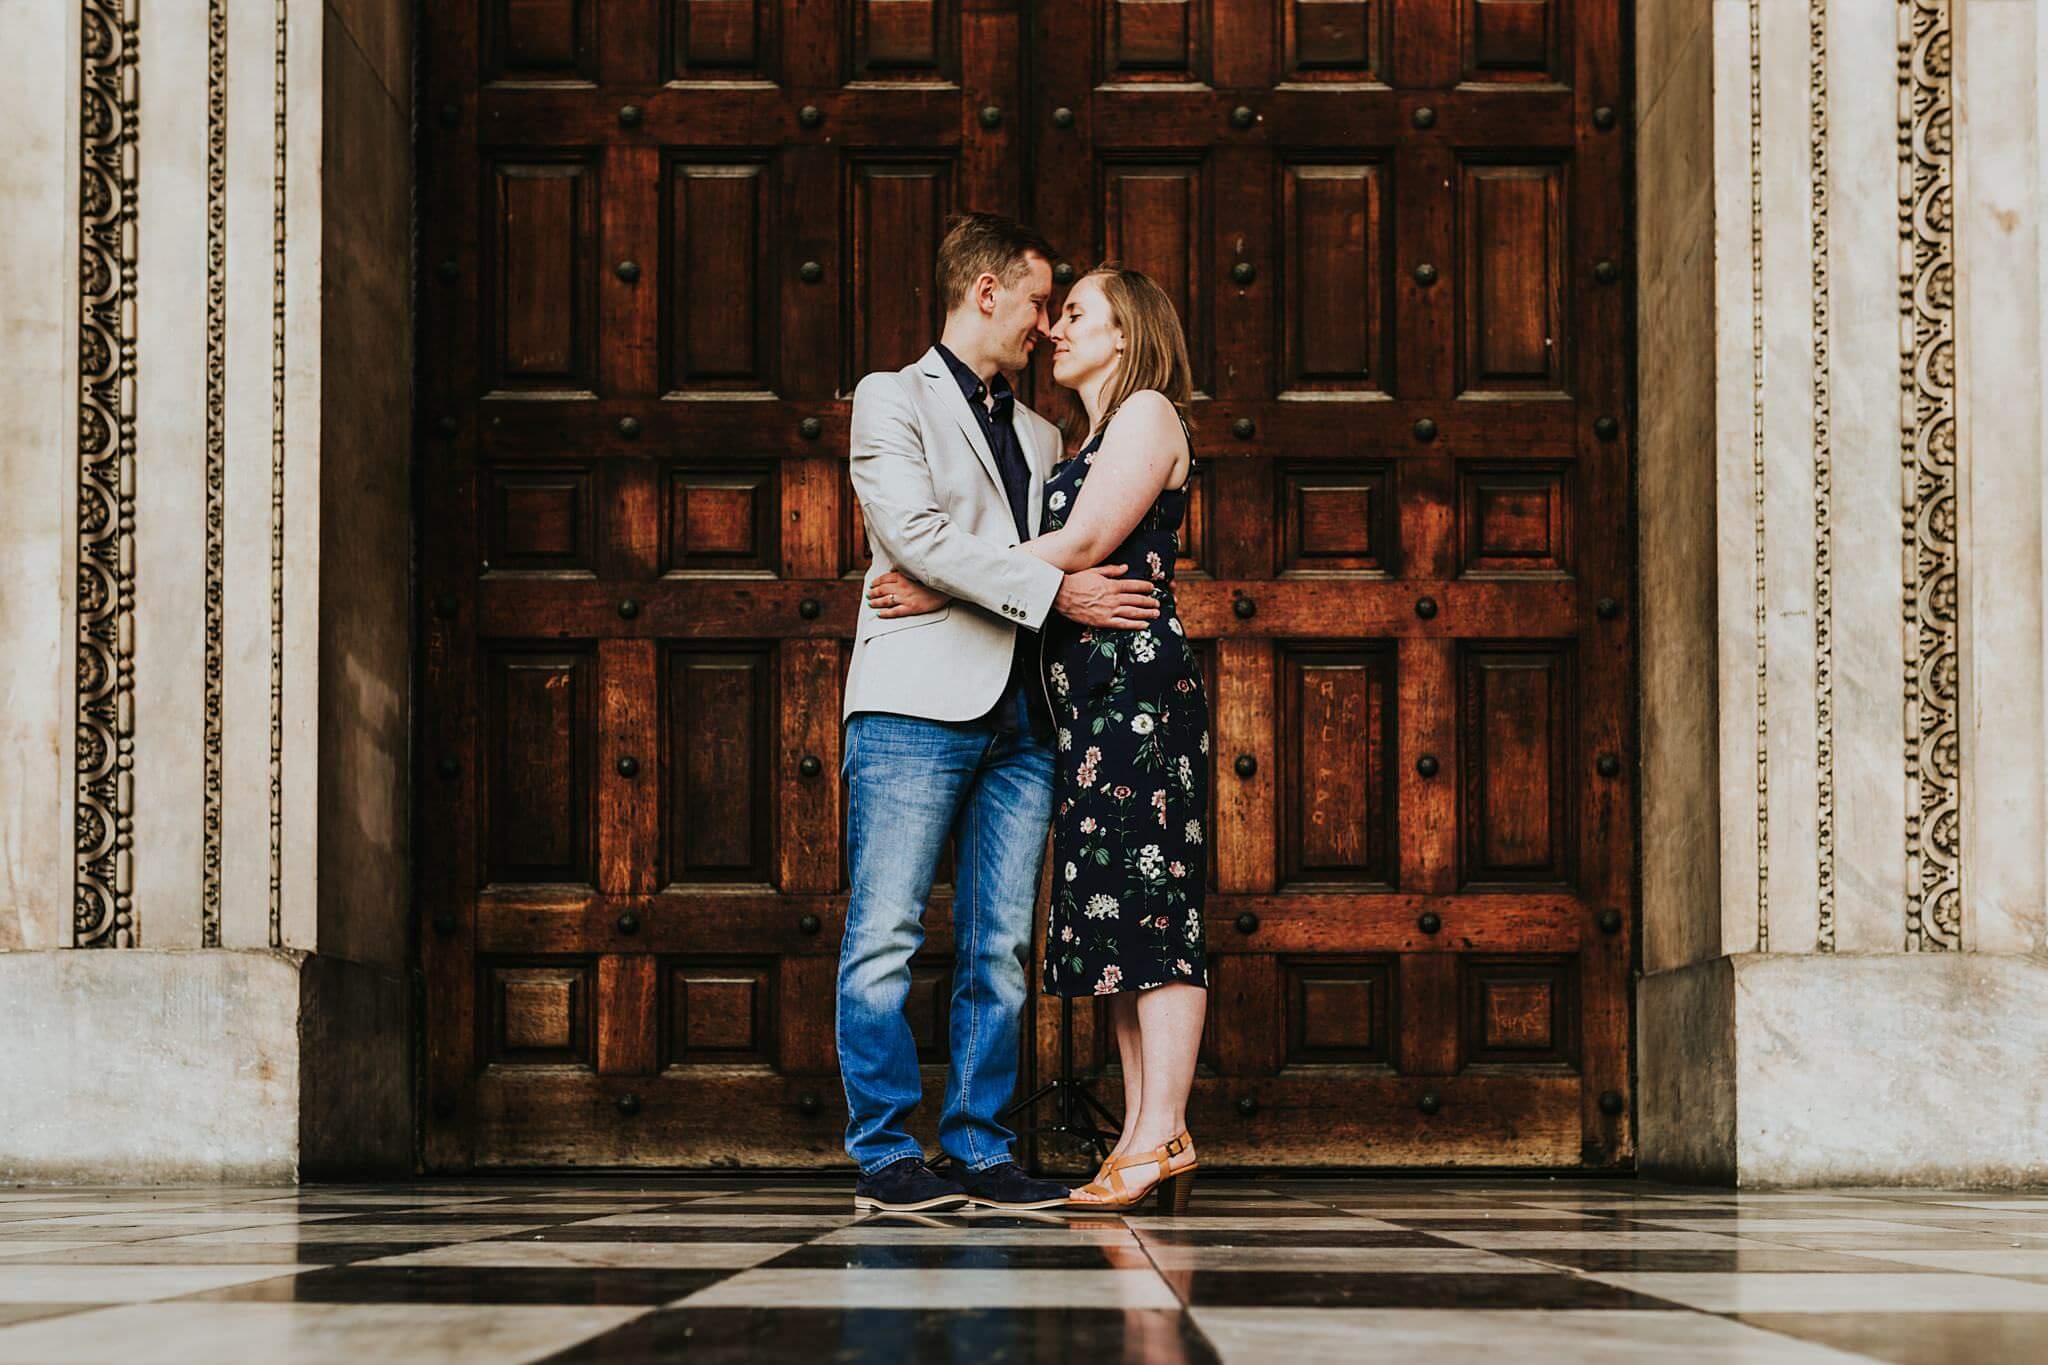 St Pauls Cathedral, London – Pre-Wedding Photography